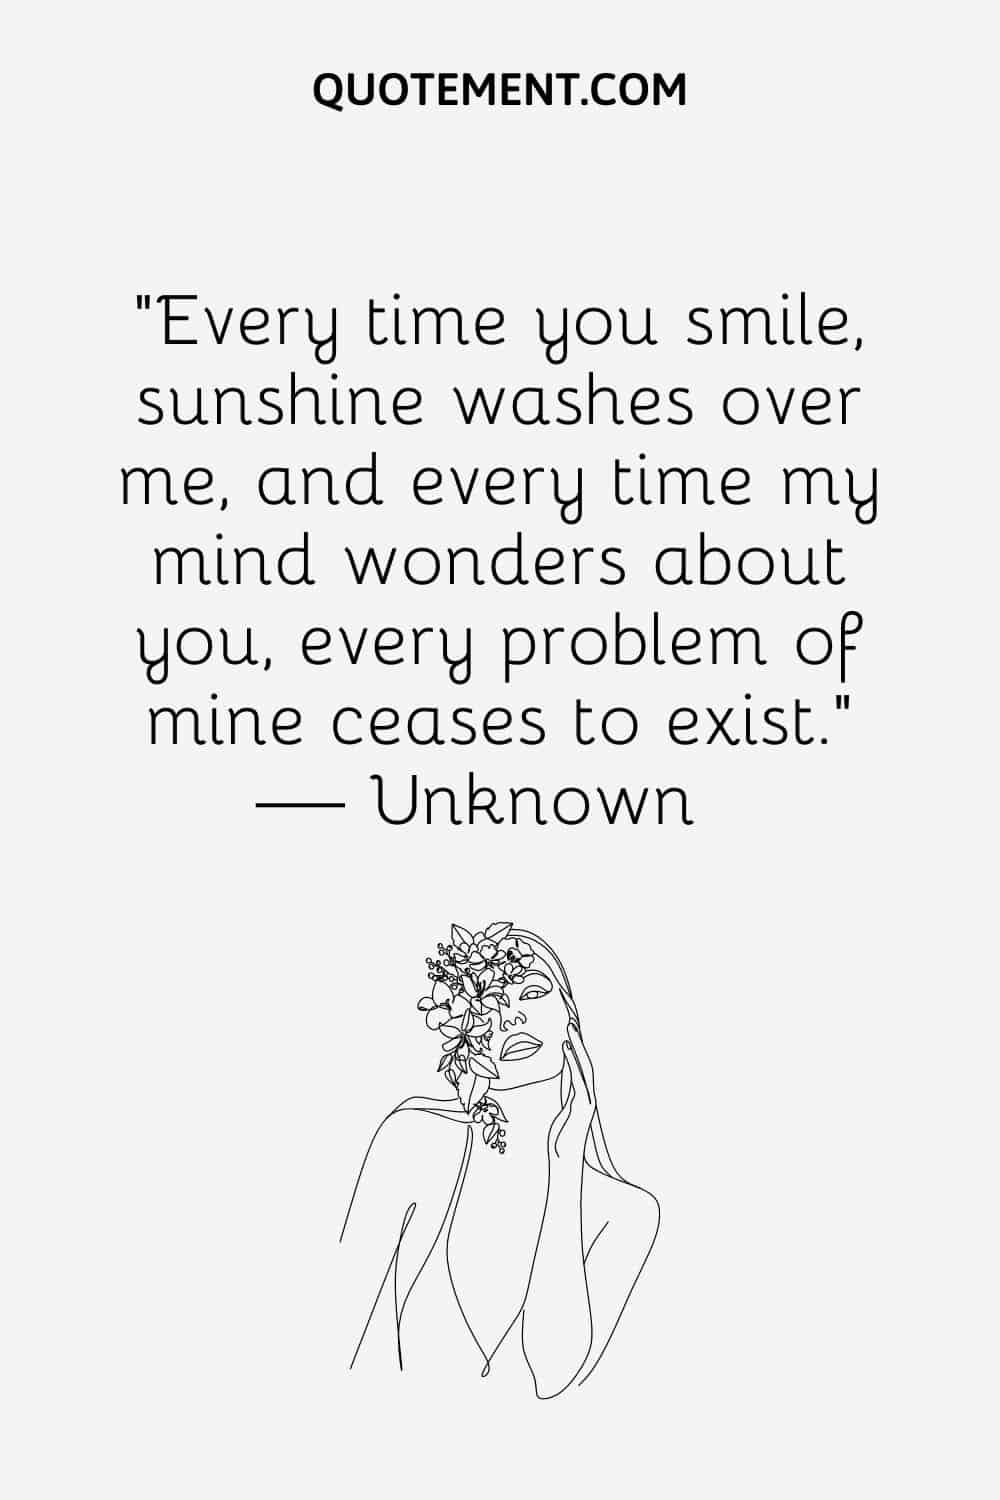 “Every time you smile, sunshine washes over me, and every time my mind wonders about you, every problem of mine ceases to exist.” — unknown